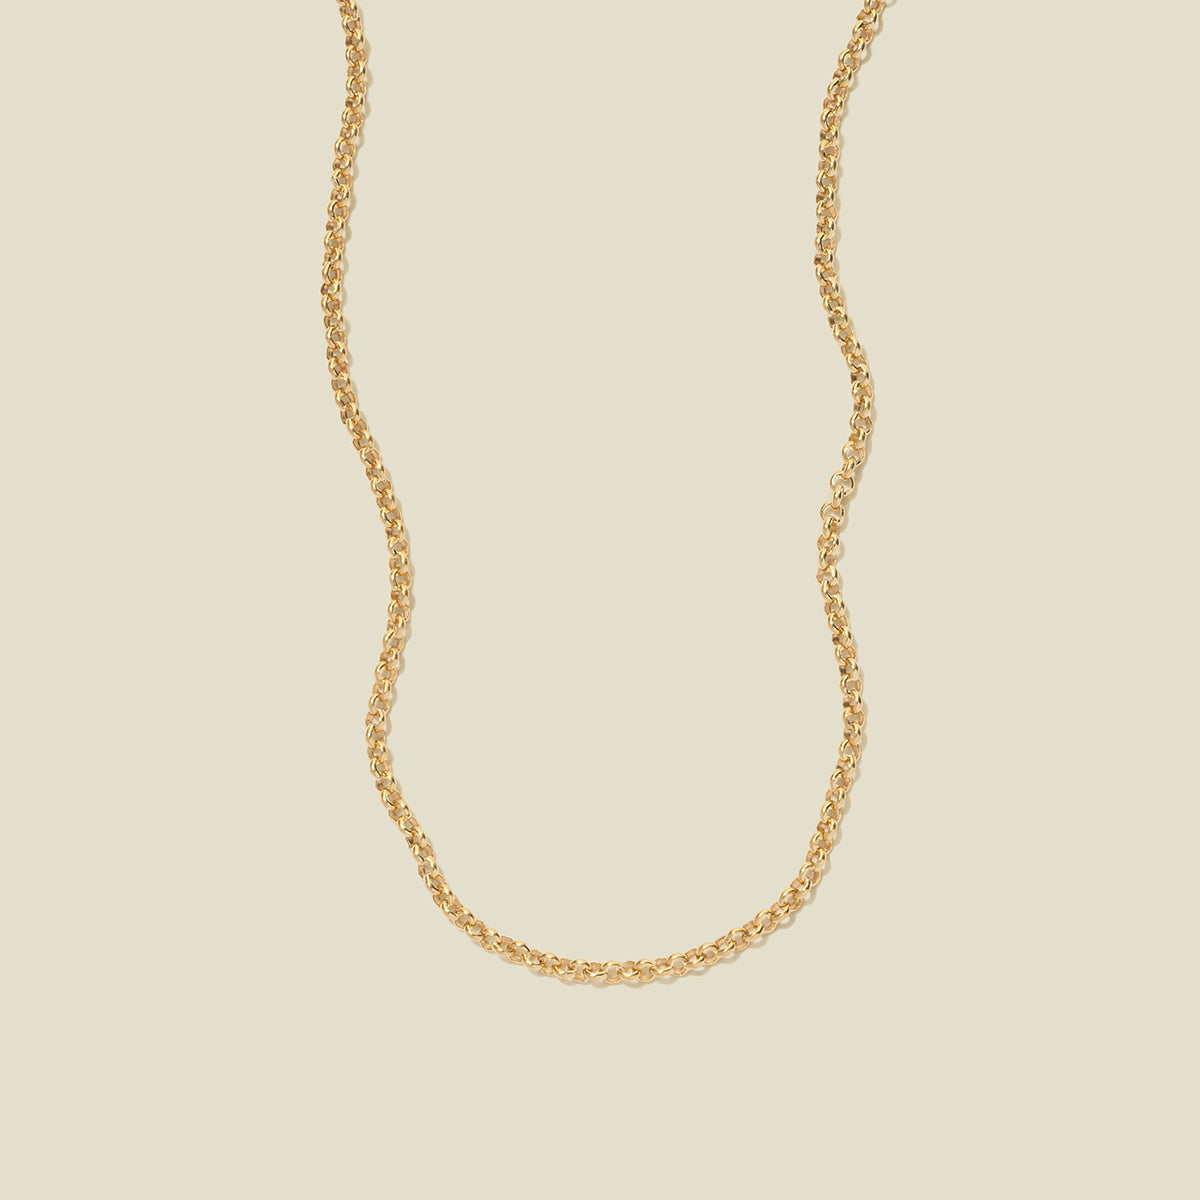 Rolo Chain Necklace Gold Filled / 16" Necklace